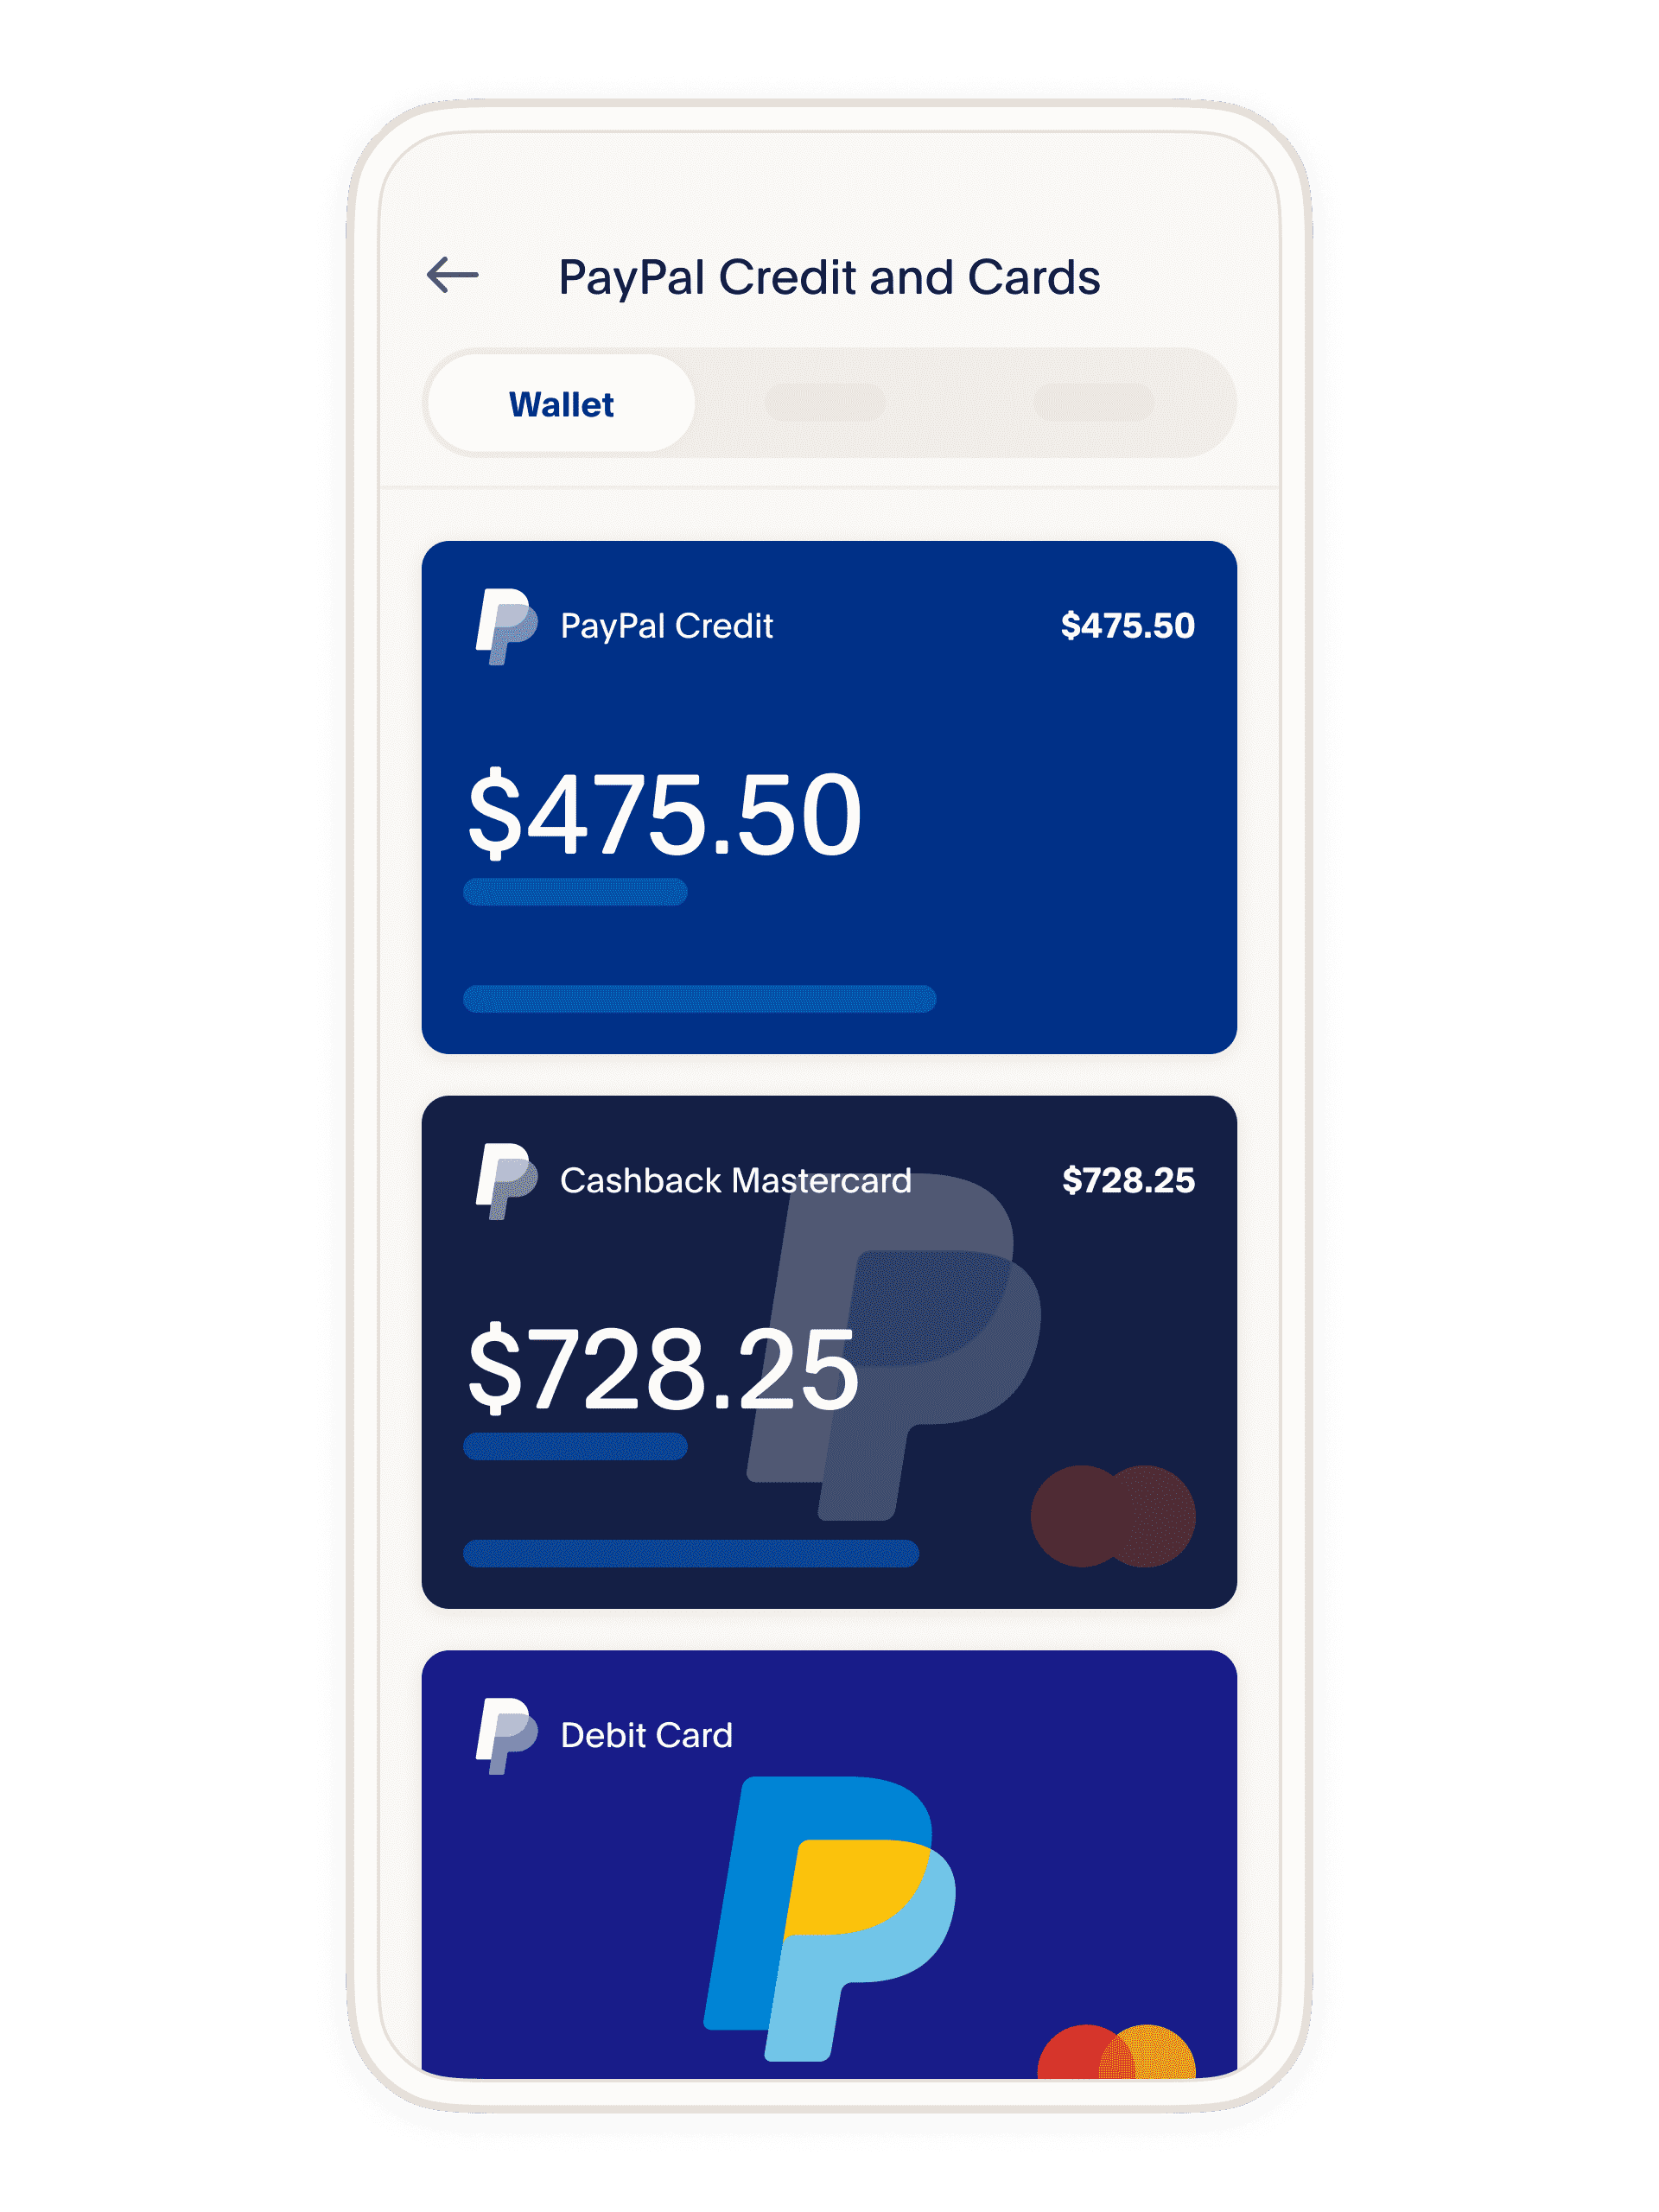 PayPal Cards and Credit Products